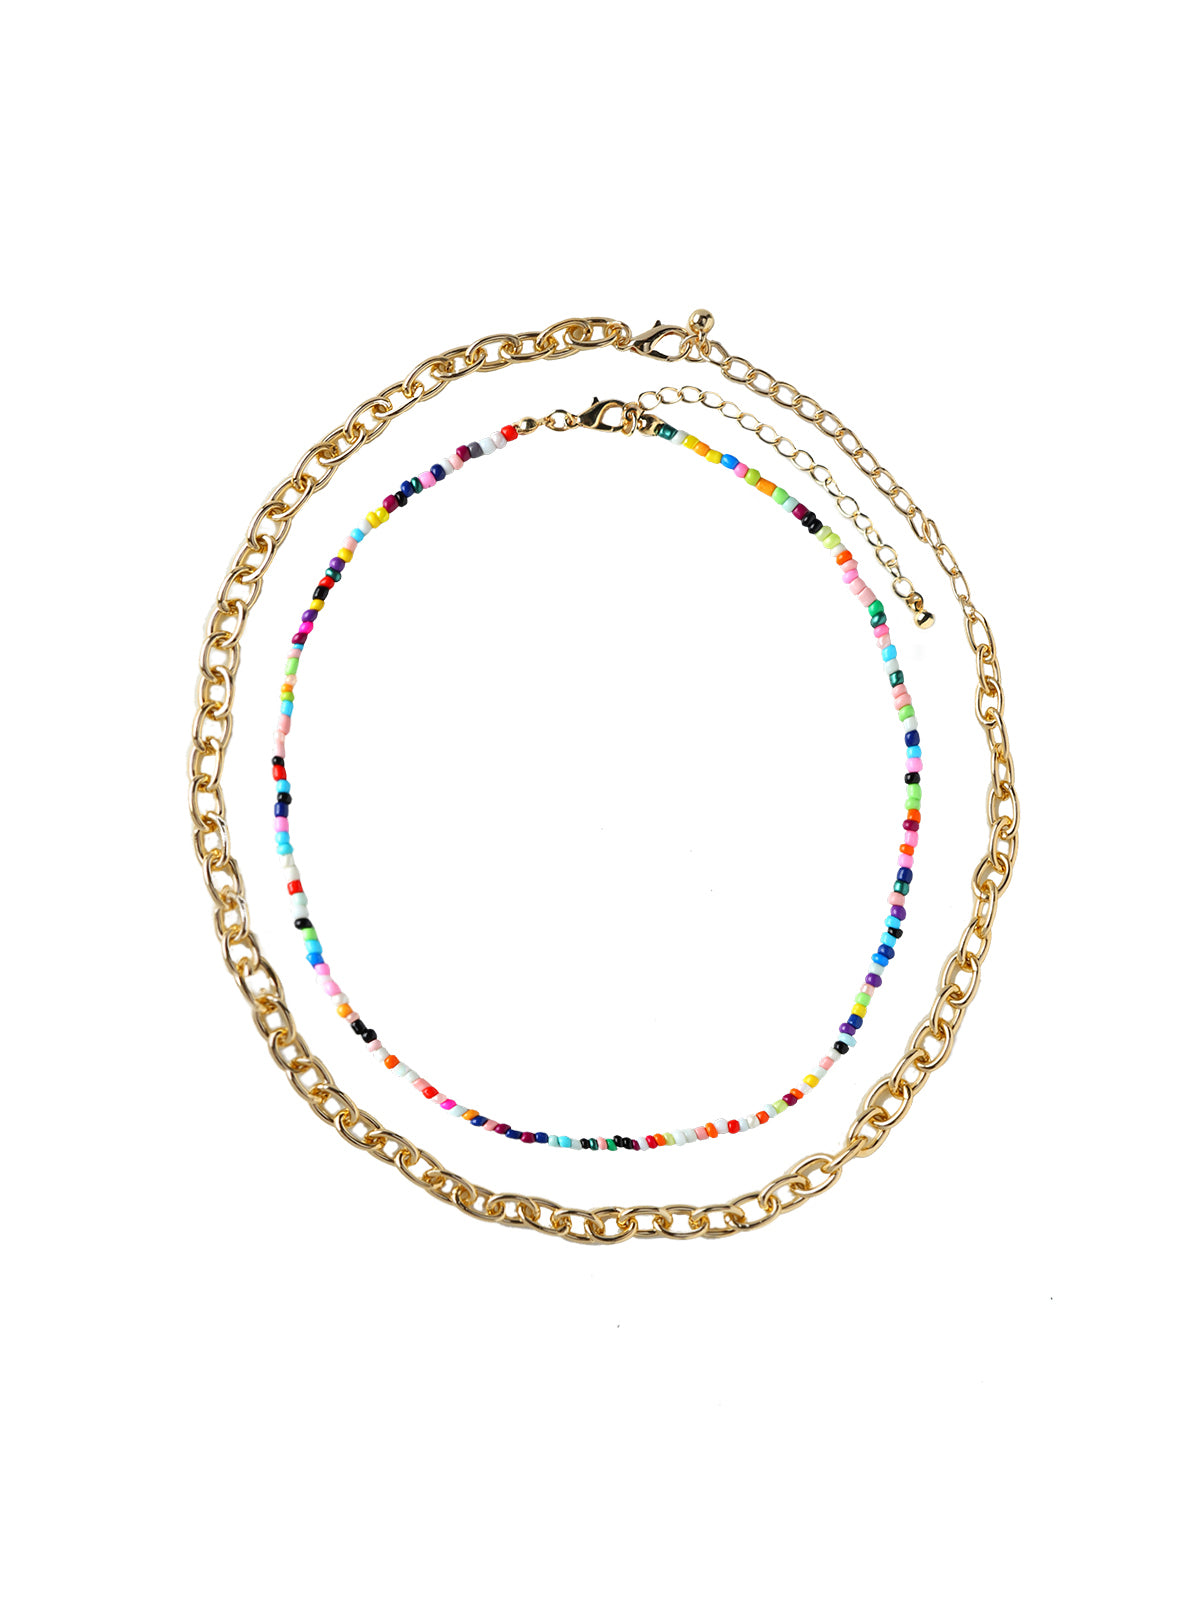 Colorful Beaded and Small Link Chain Necklace Set